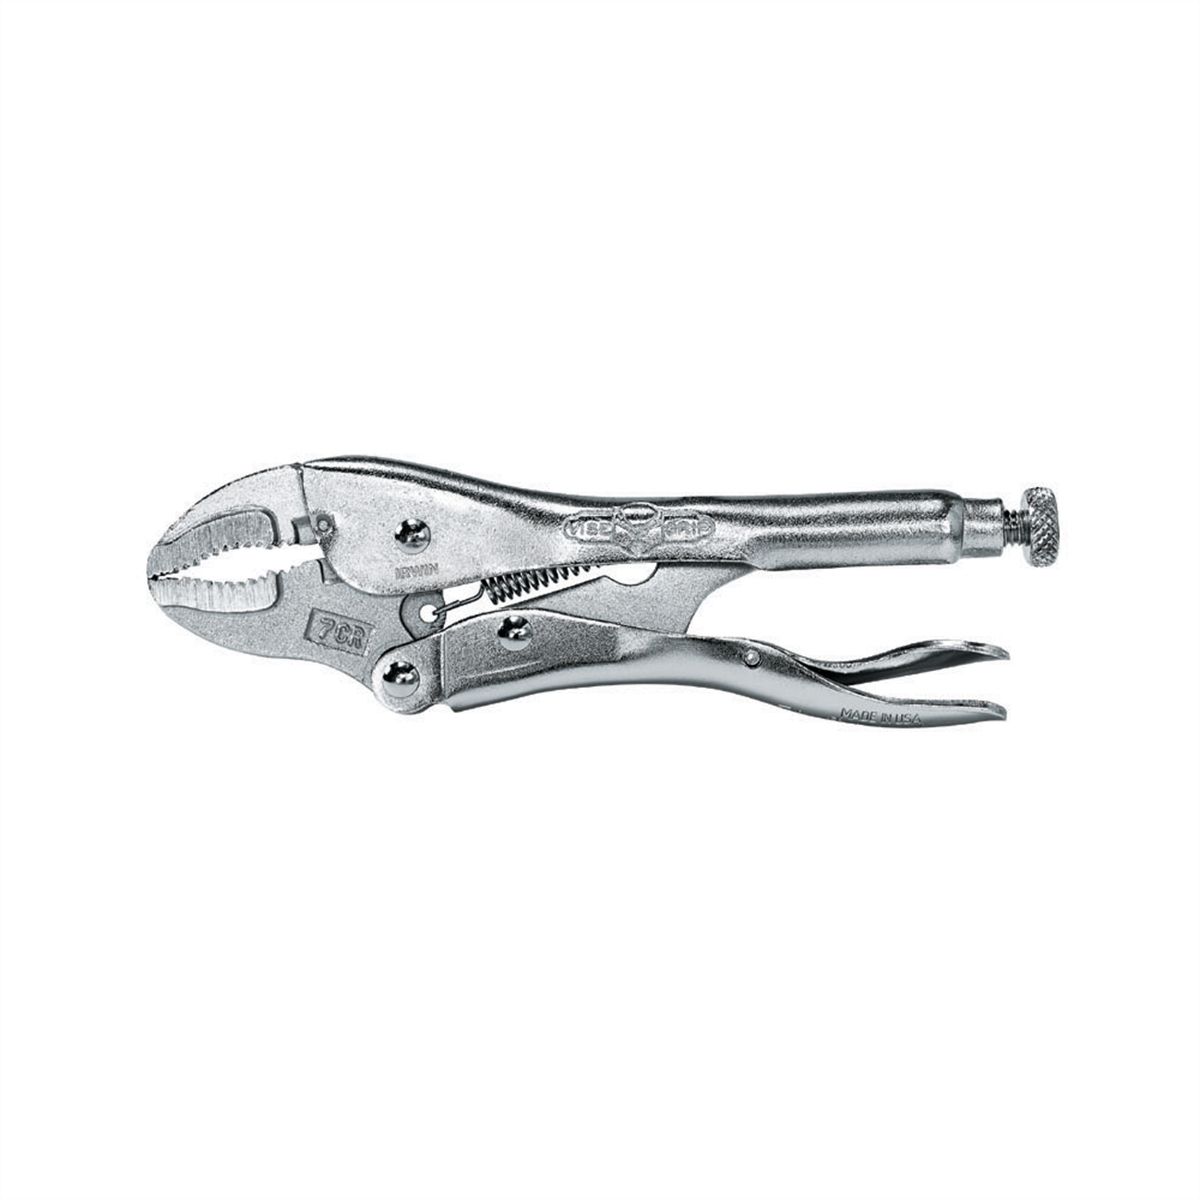 Irwin Tool Vise Grip 7CR Curved Jaw Locking Pliers 175mm 7